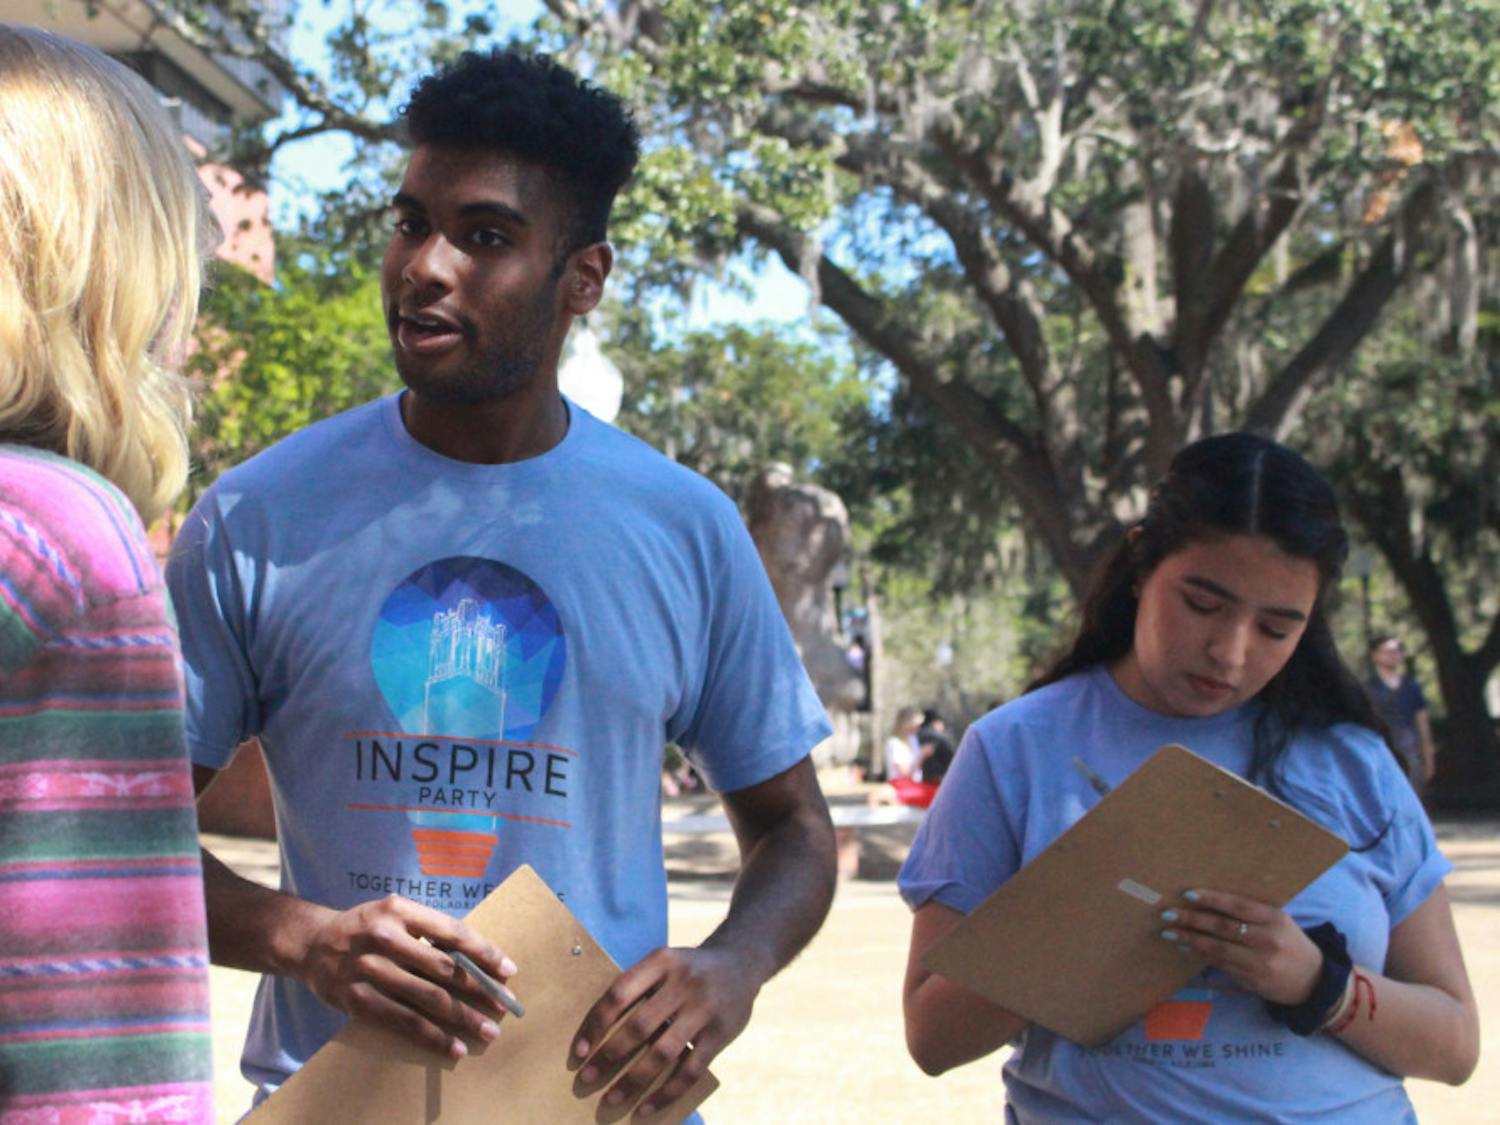 Che John, a 19-year-old UF finance sophomore, and Maria Espinoza, a 19-year-old UF criminology sophomore, talked to students Tuesday afternoon on Turlington Plaza. John and Espinoza are both members of Inspire Party, and they spent the afternoon reaching out to students about the upcoming Student Government elections.
&nbsp;